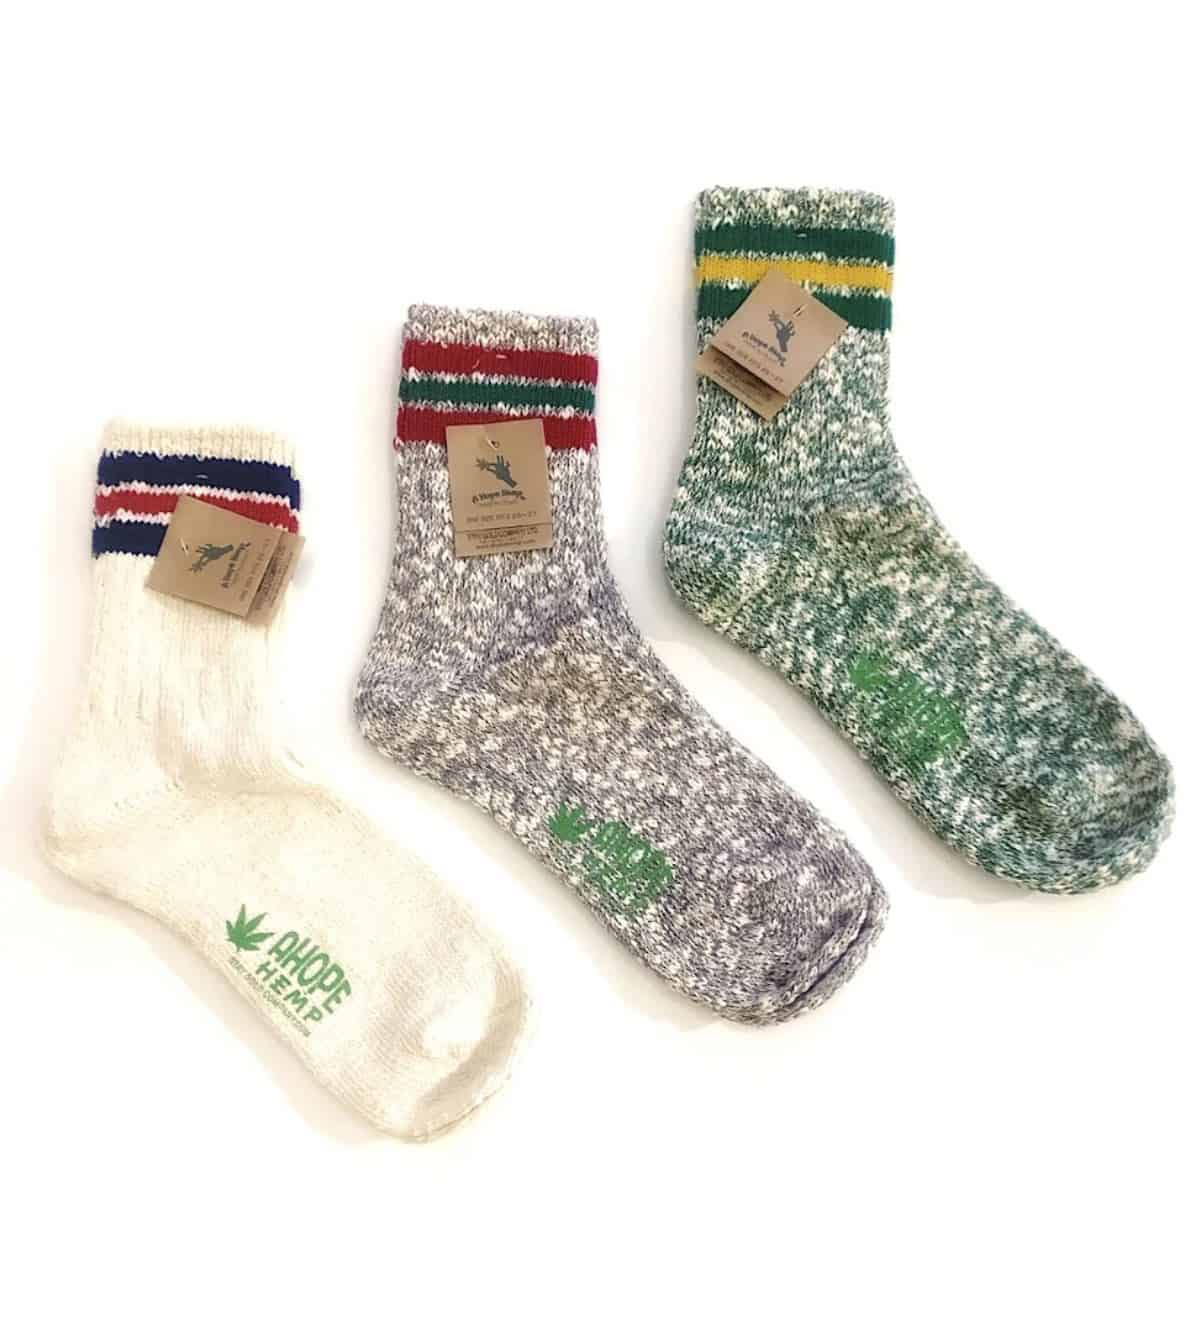 Thick warm hemp socks from the brand AHOPE. 